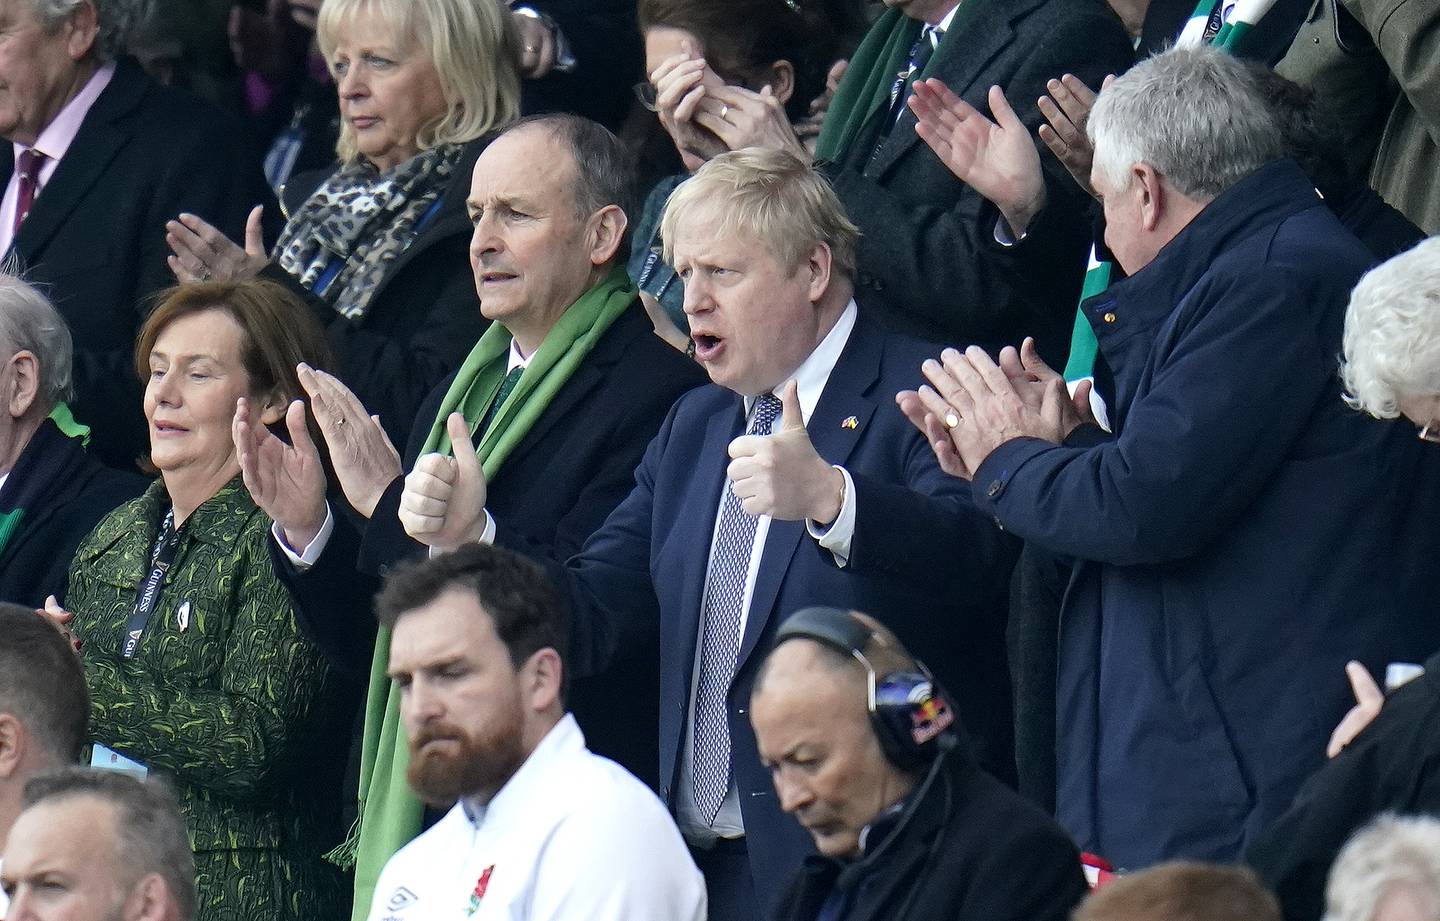 Taoiseach Micheal Martin and Prime Minister Boris Johnson in the stands during the Guinness Six Nations match at Twickenham Stadium.